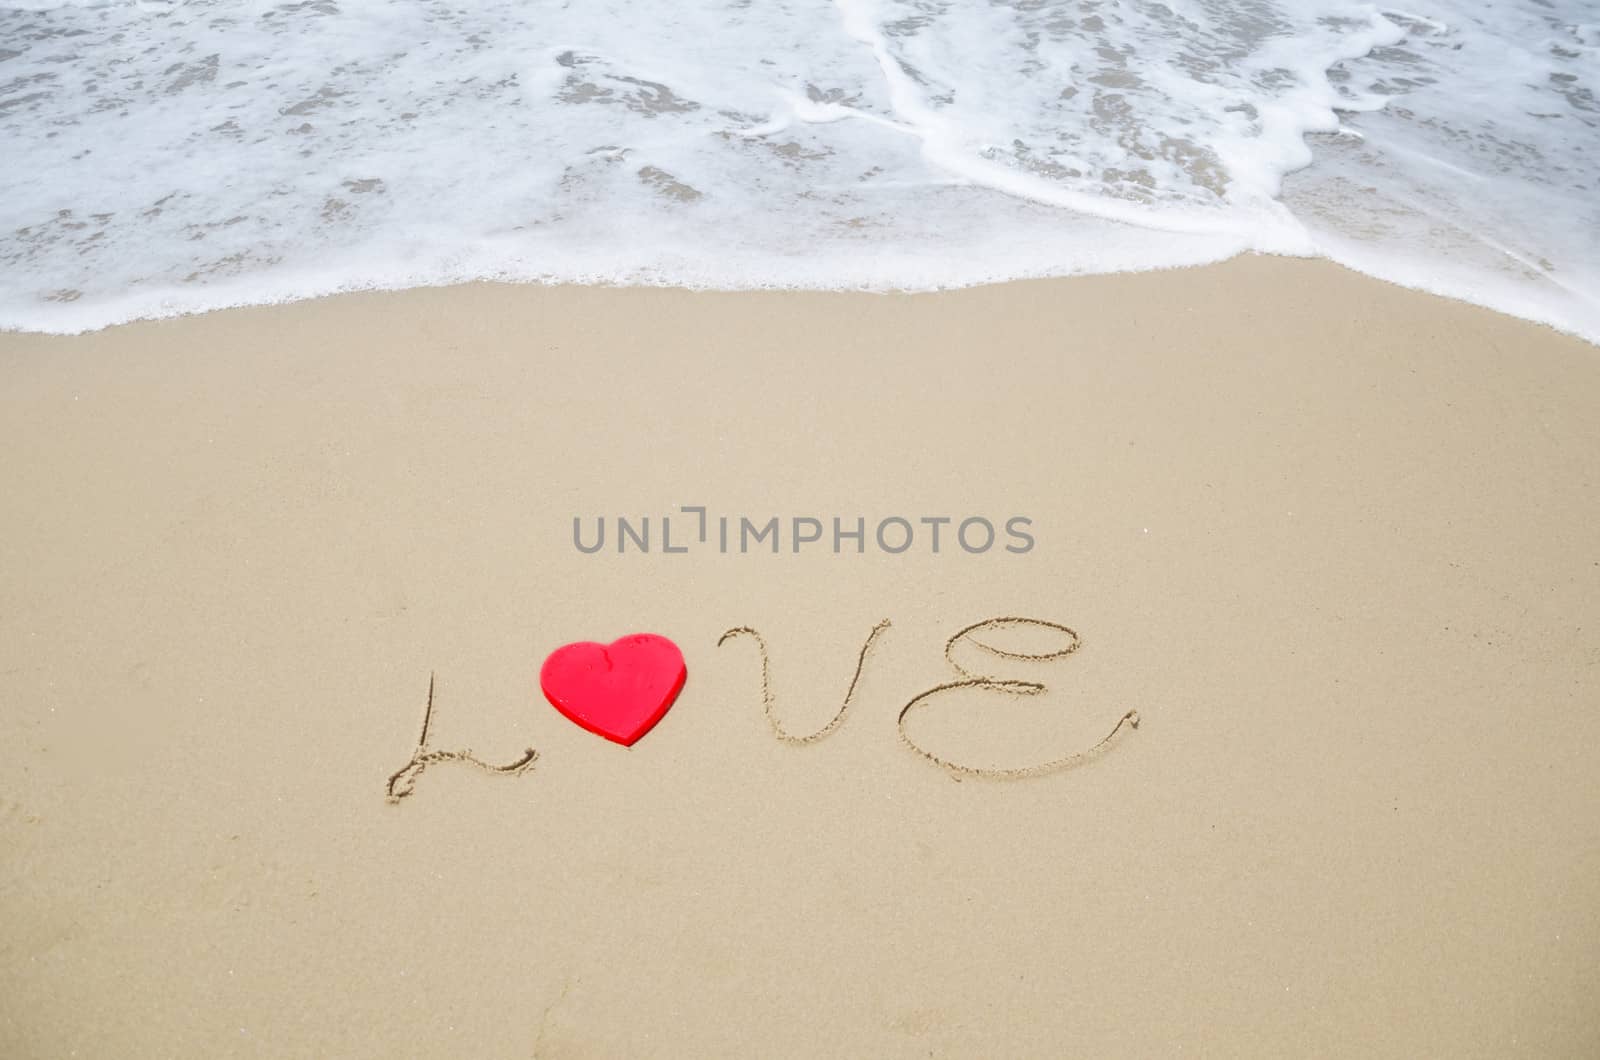 Word "Love" with red heart shape on the sandy beach